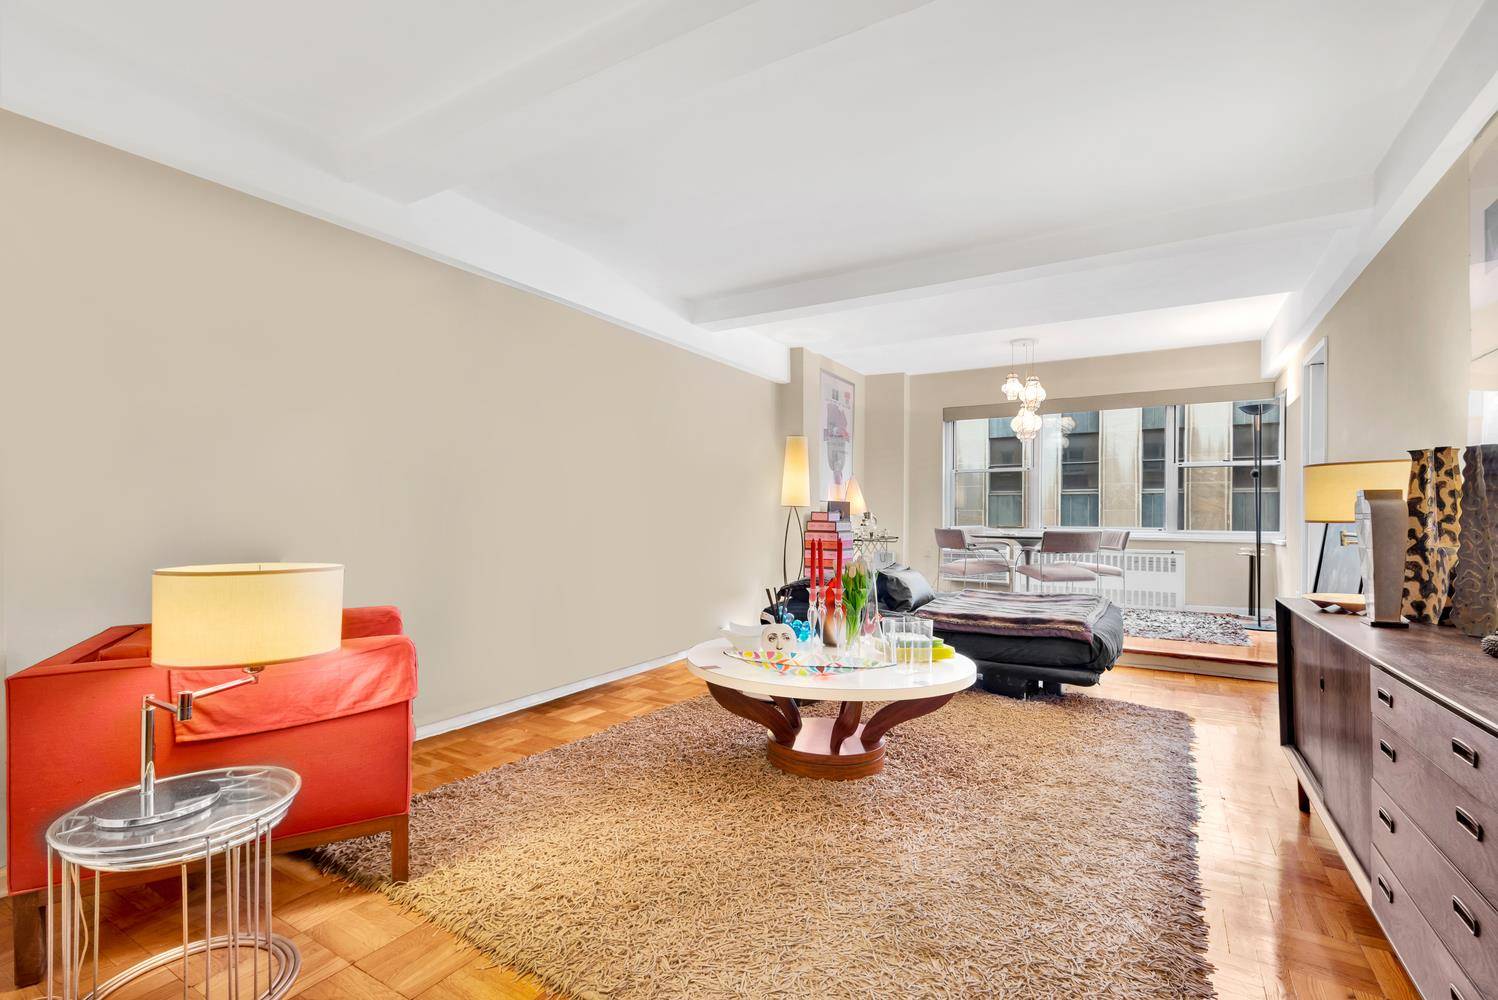 This charming, sophisticated, and light filled studio is perfectly perched at the convergence of Gramercy Park, Union Square, and Chelsea.